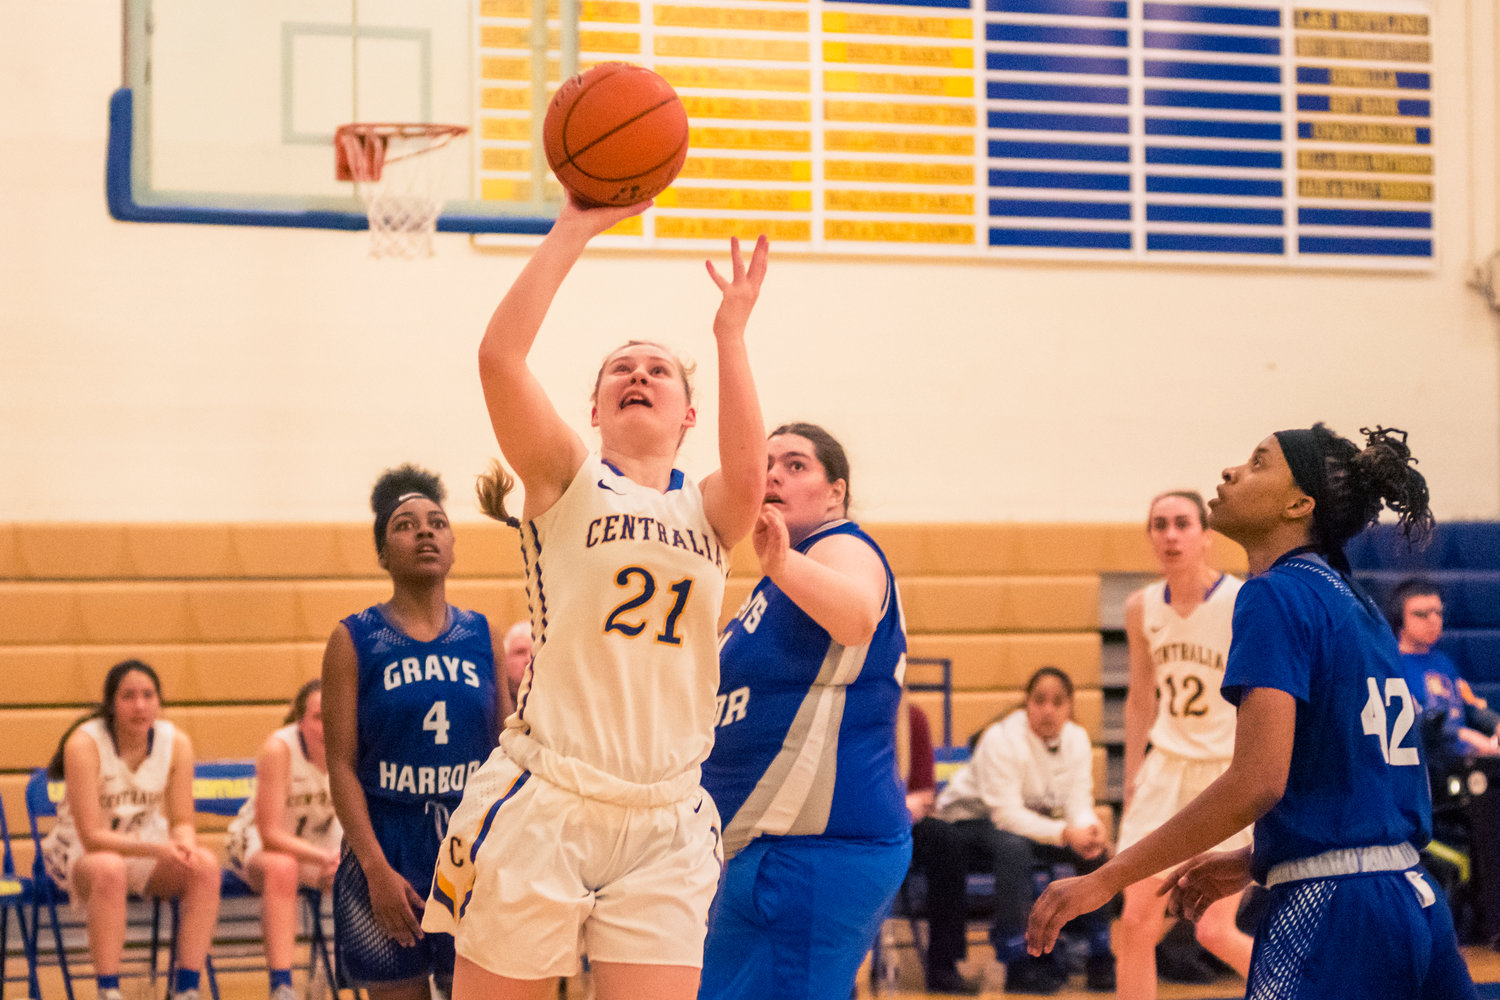 Centralia's Rachel Wilkerson (21) puts the ball up during a game against Grays Harbor Wednesday night at Centralia College.